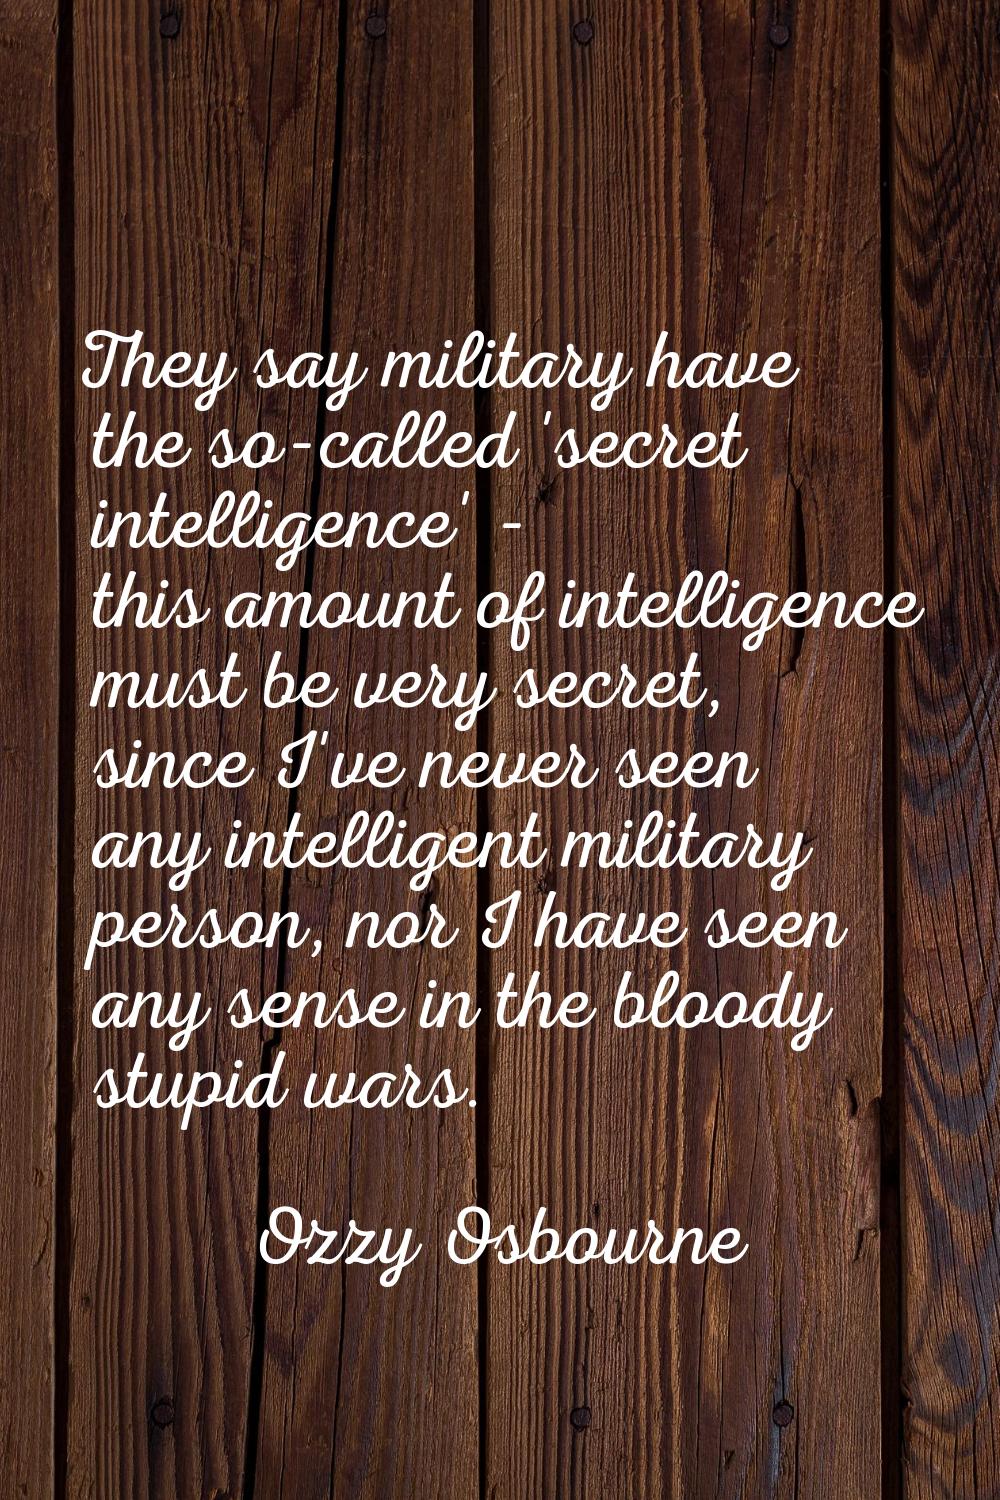 They say military have the so-called 'secret intelligence' - this amount of intelligence must be ve